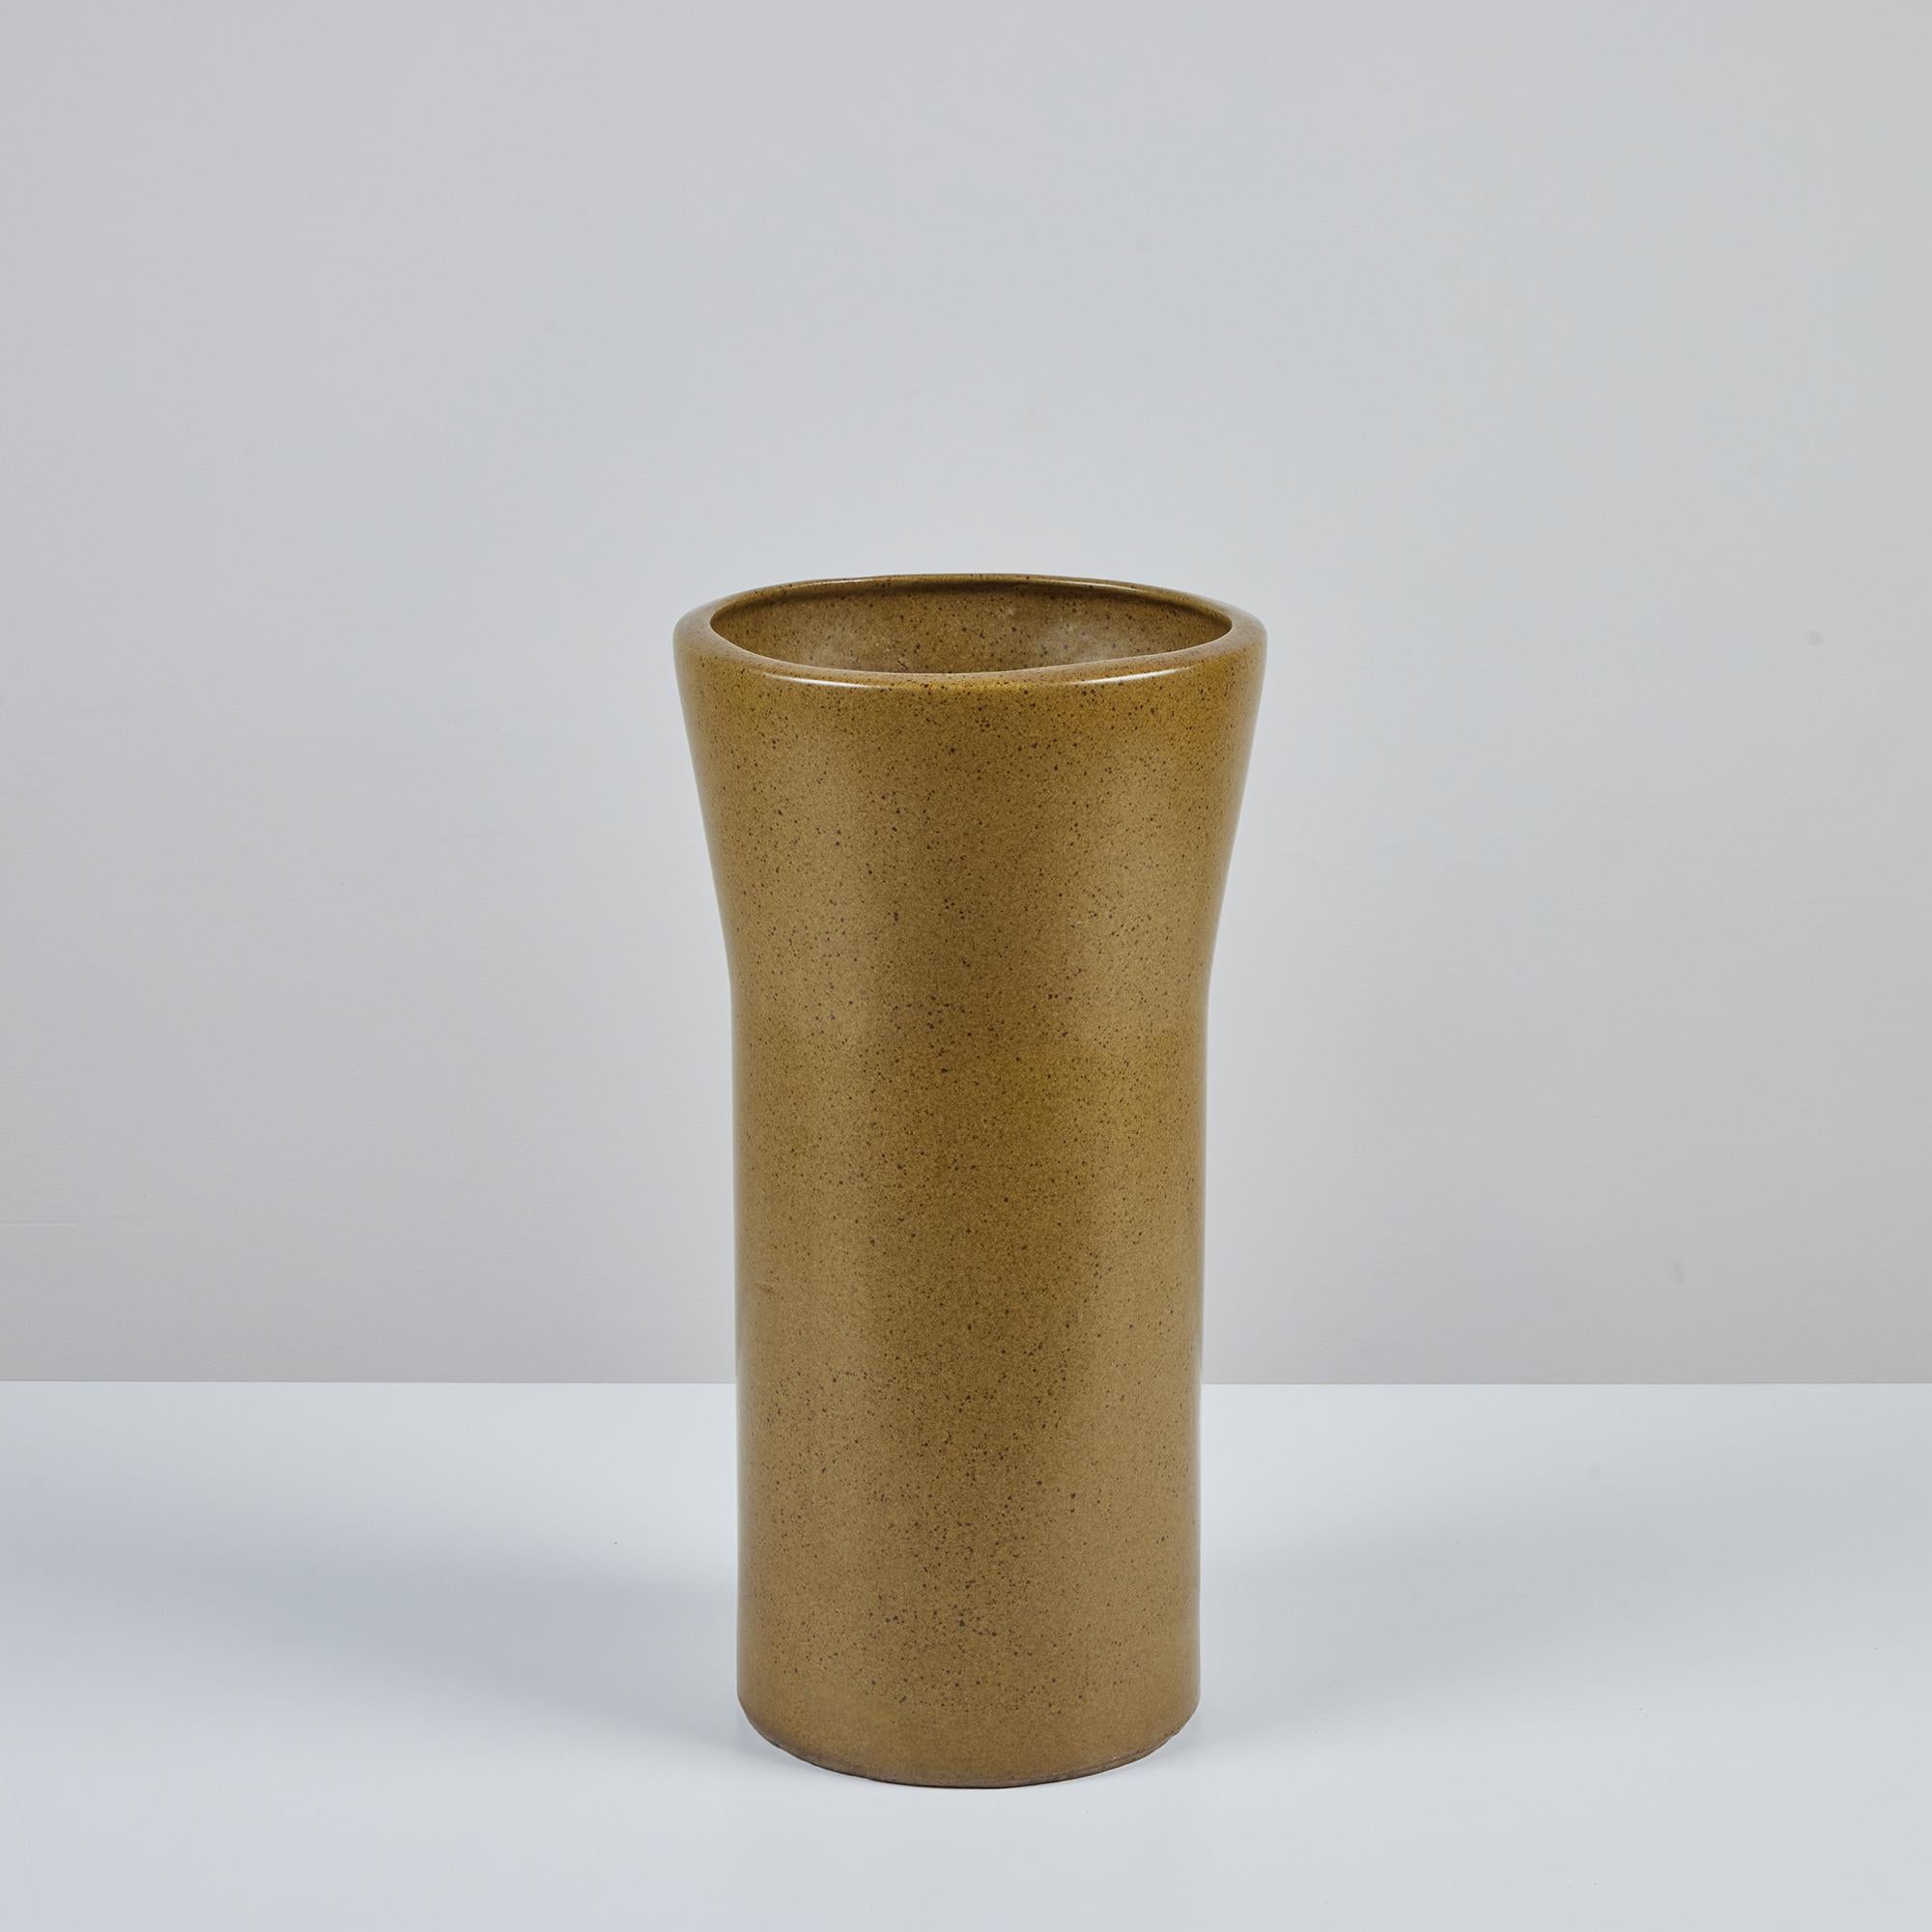 Planter by David Cressey for Architectural Pottery's Pro/Artisan collection. This planter has a soft olive green speckle glazed exterior and interior. The top of the planter has slightly bowed sides and a flattened lip.

Dimensions
10.5